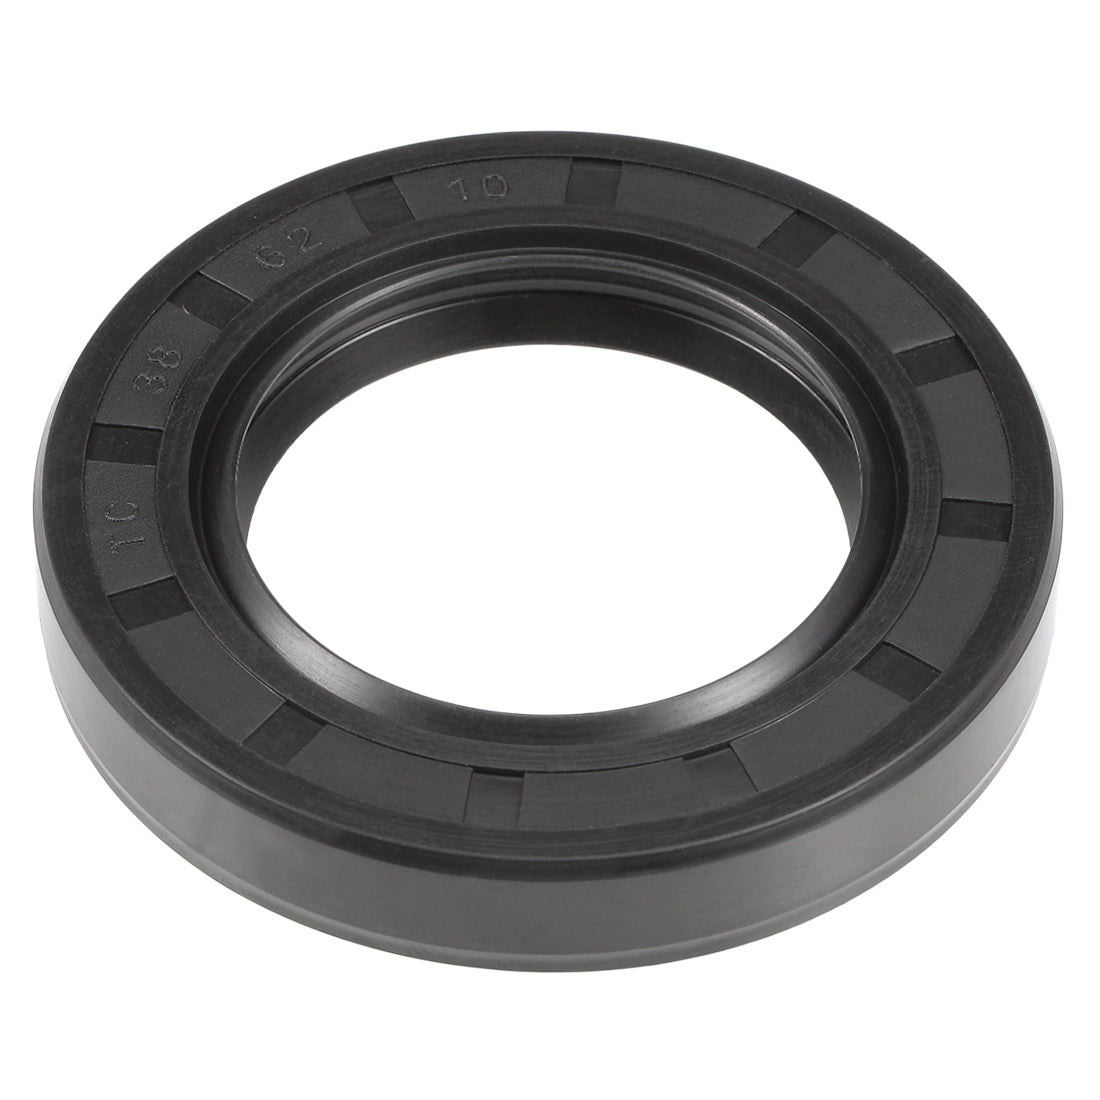 Uxcell Uxcell Oil Seal, TC 38mm x 58mm x 10mm, Nitrile Rubber Cover Double Lip